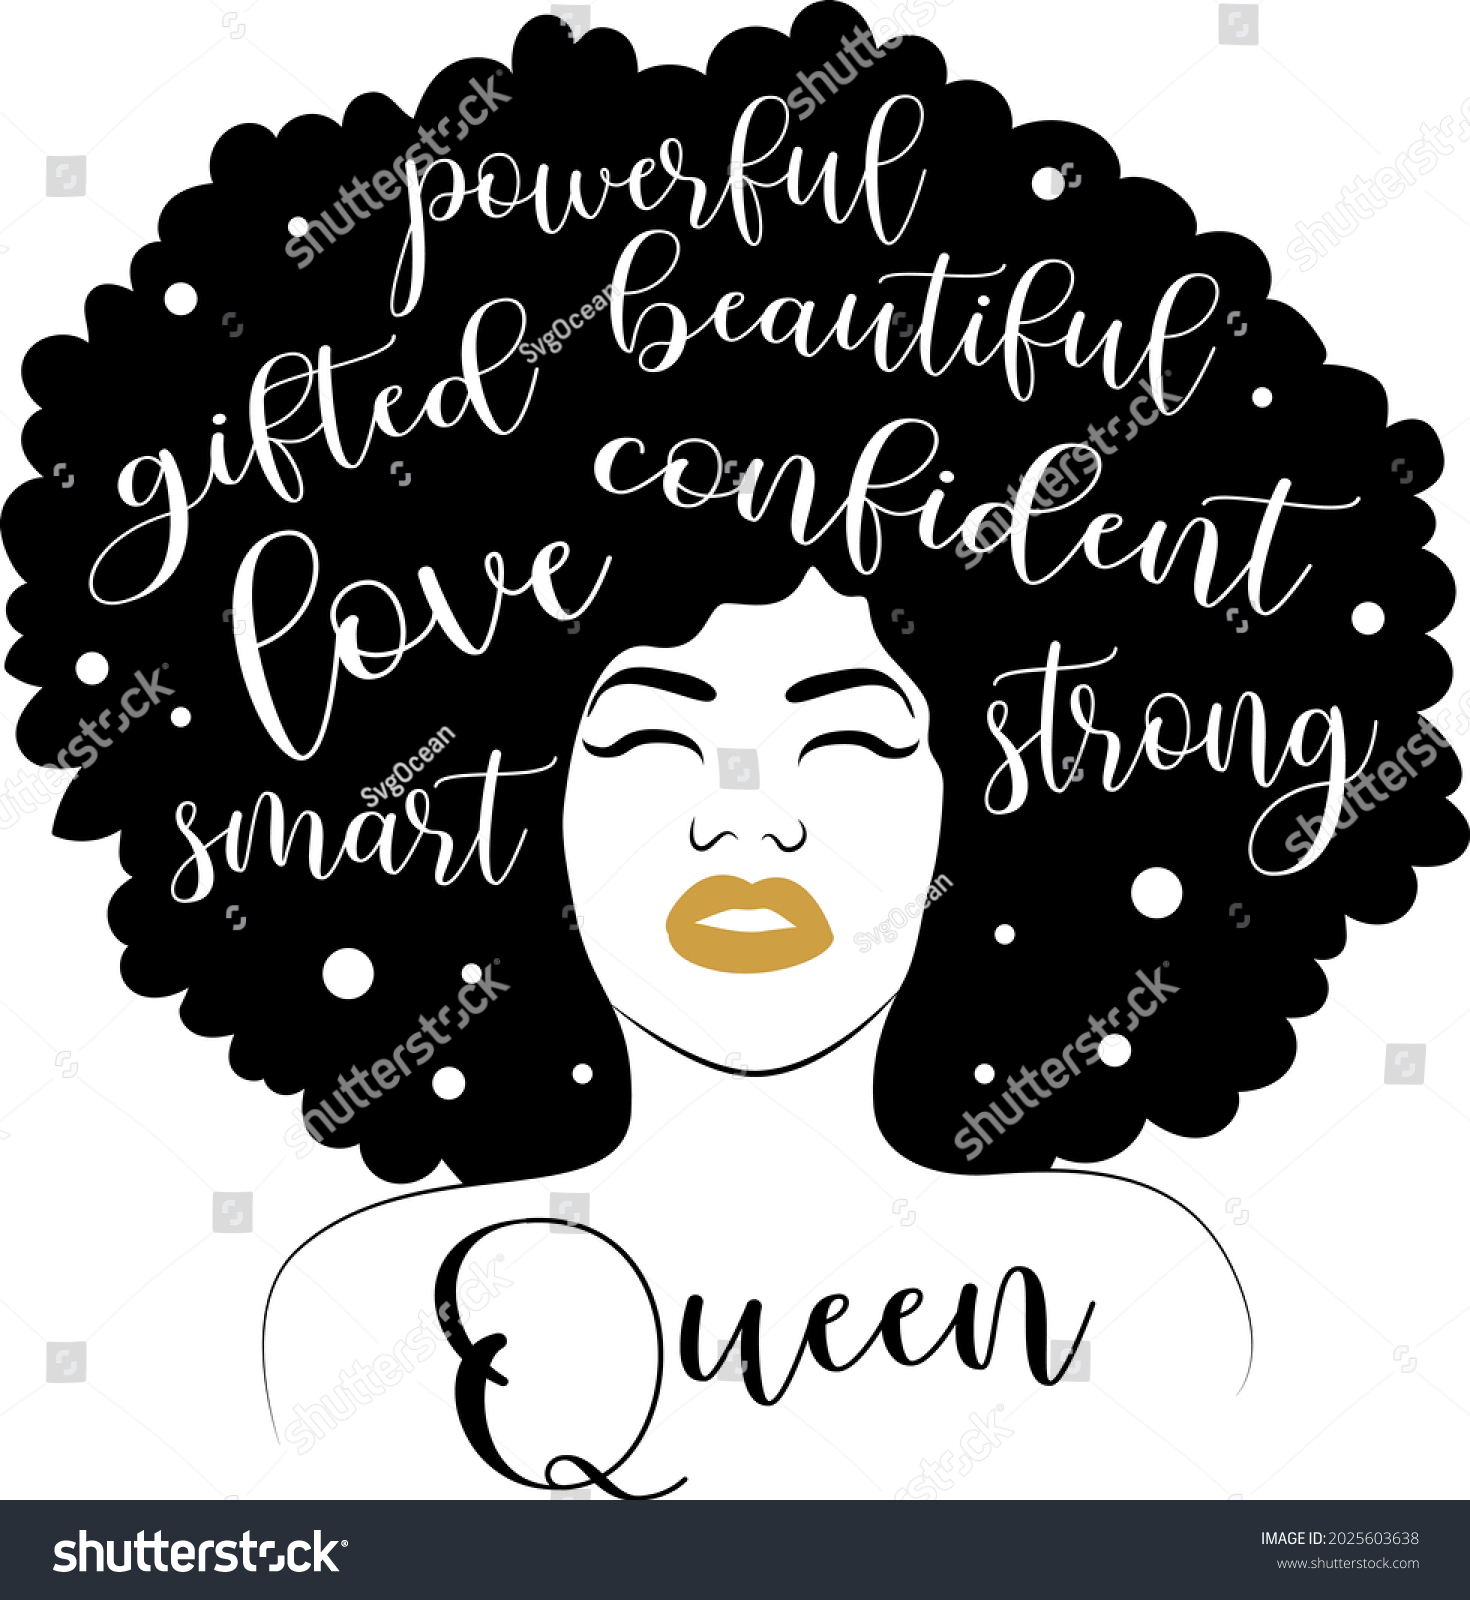 SVG of Powerful gifted beautiful queen lettering. Afro woman illustration vector svg